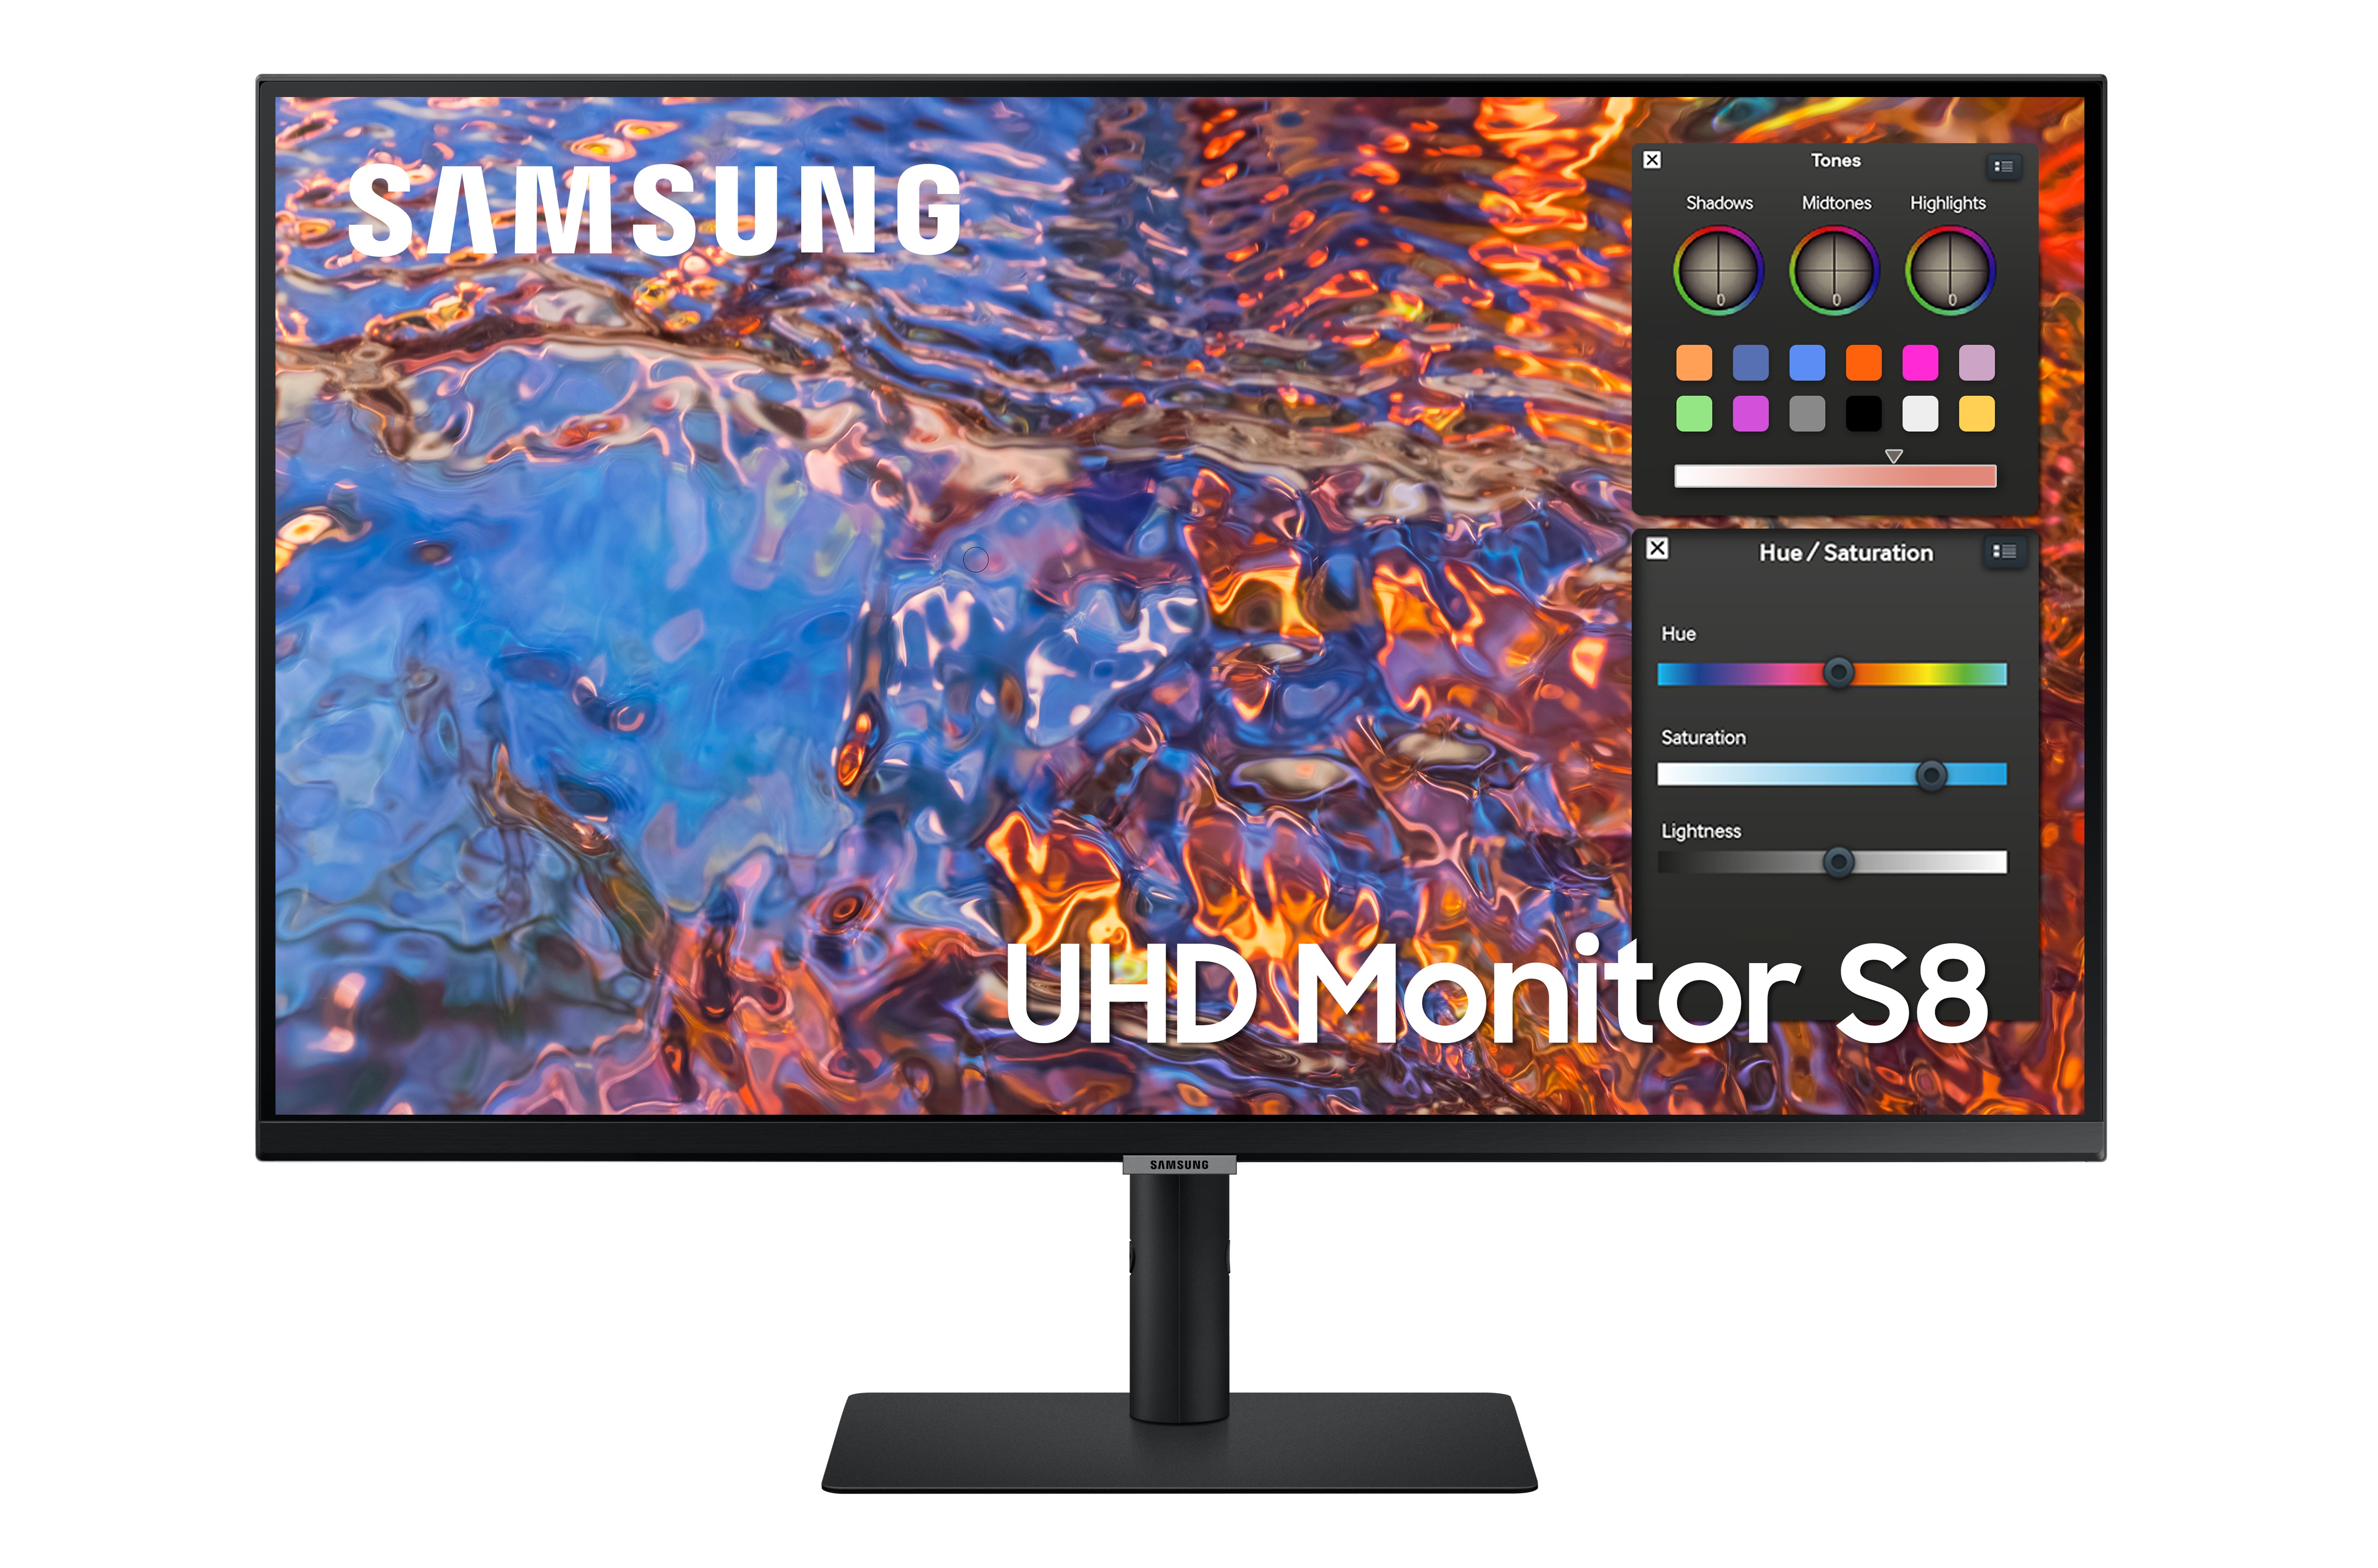 High-res-Monitor-S8-front.jpg